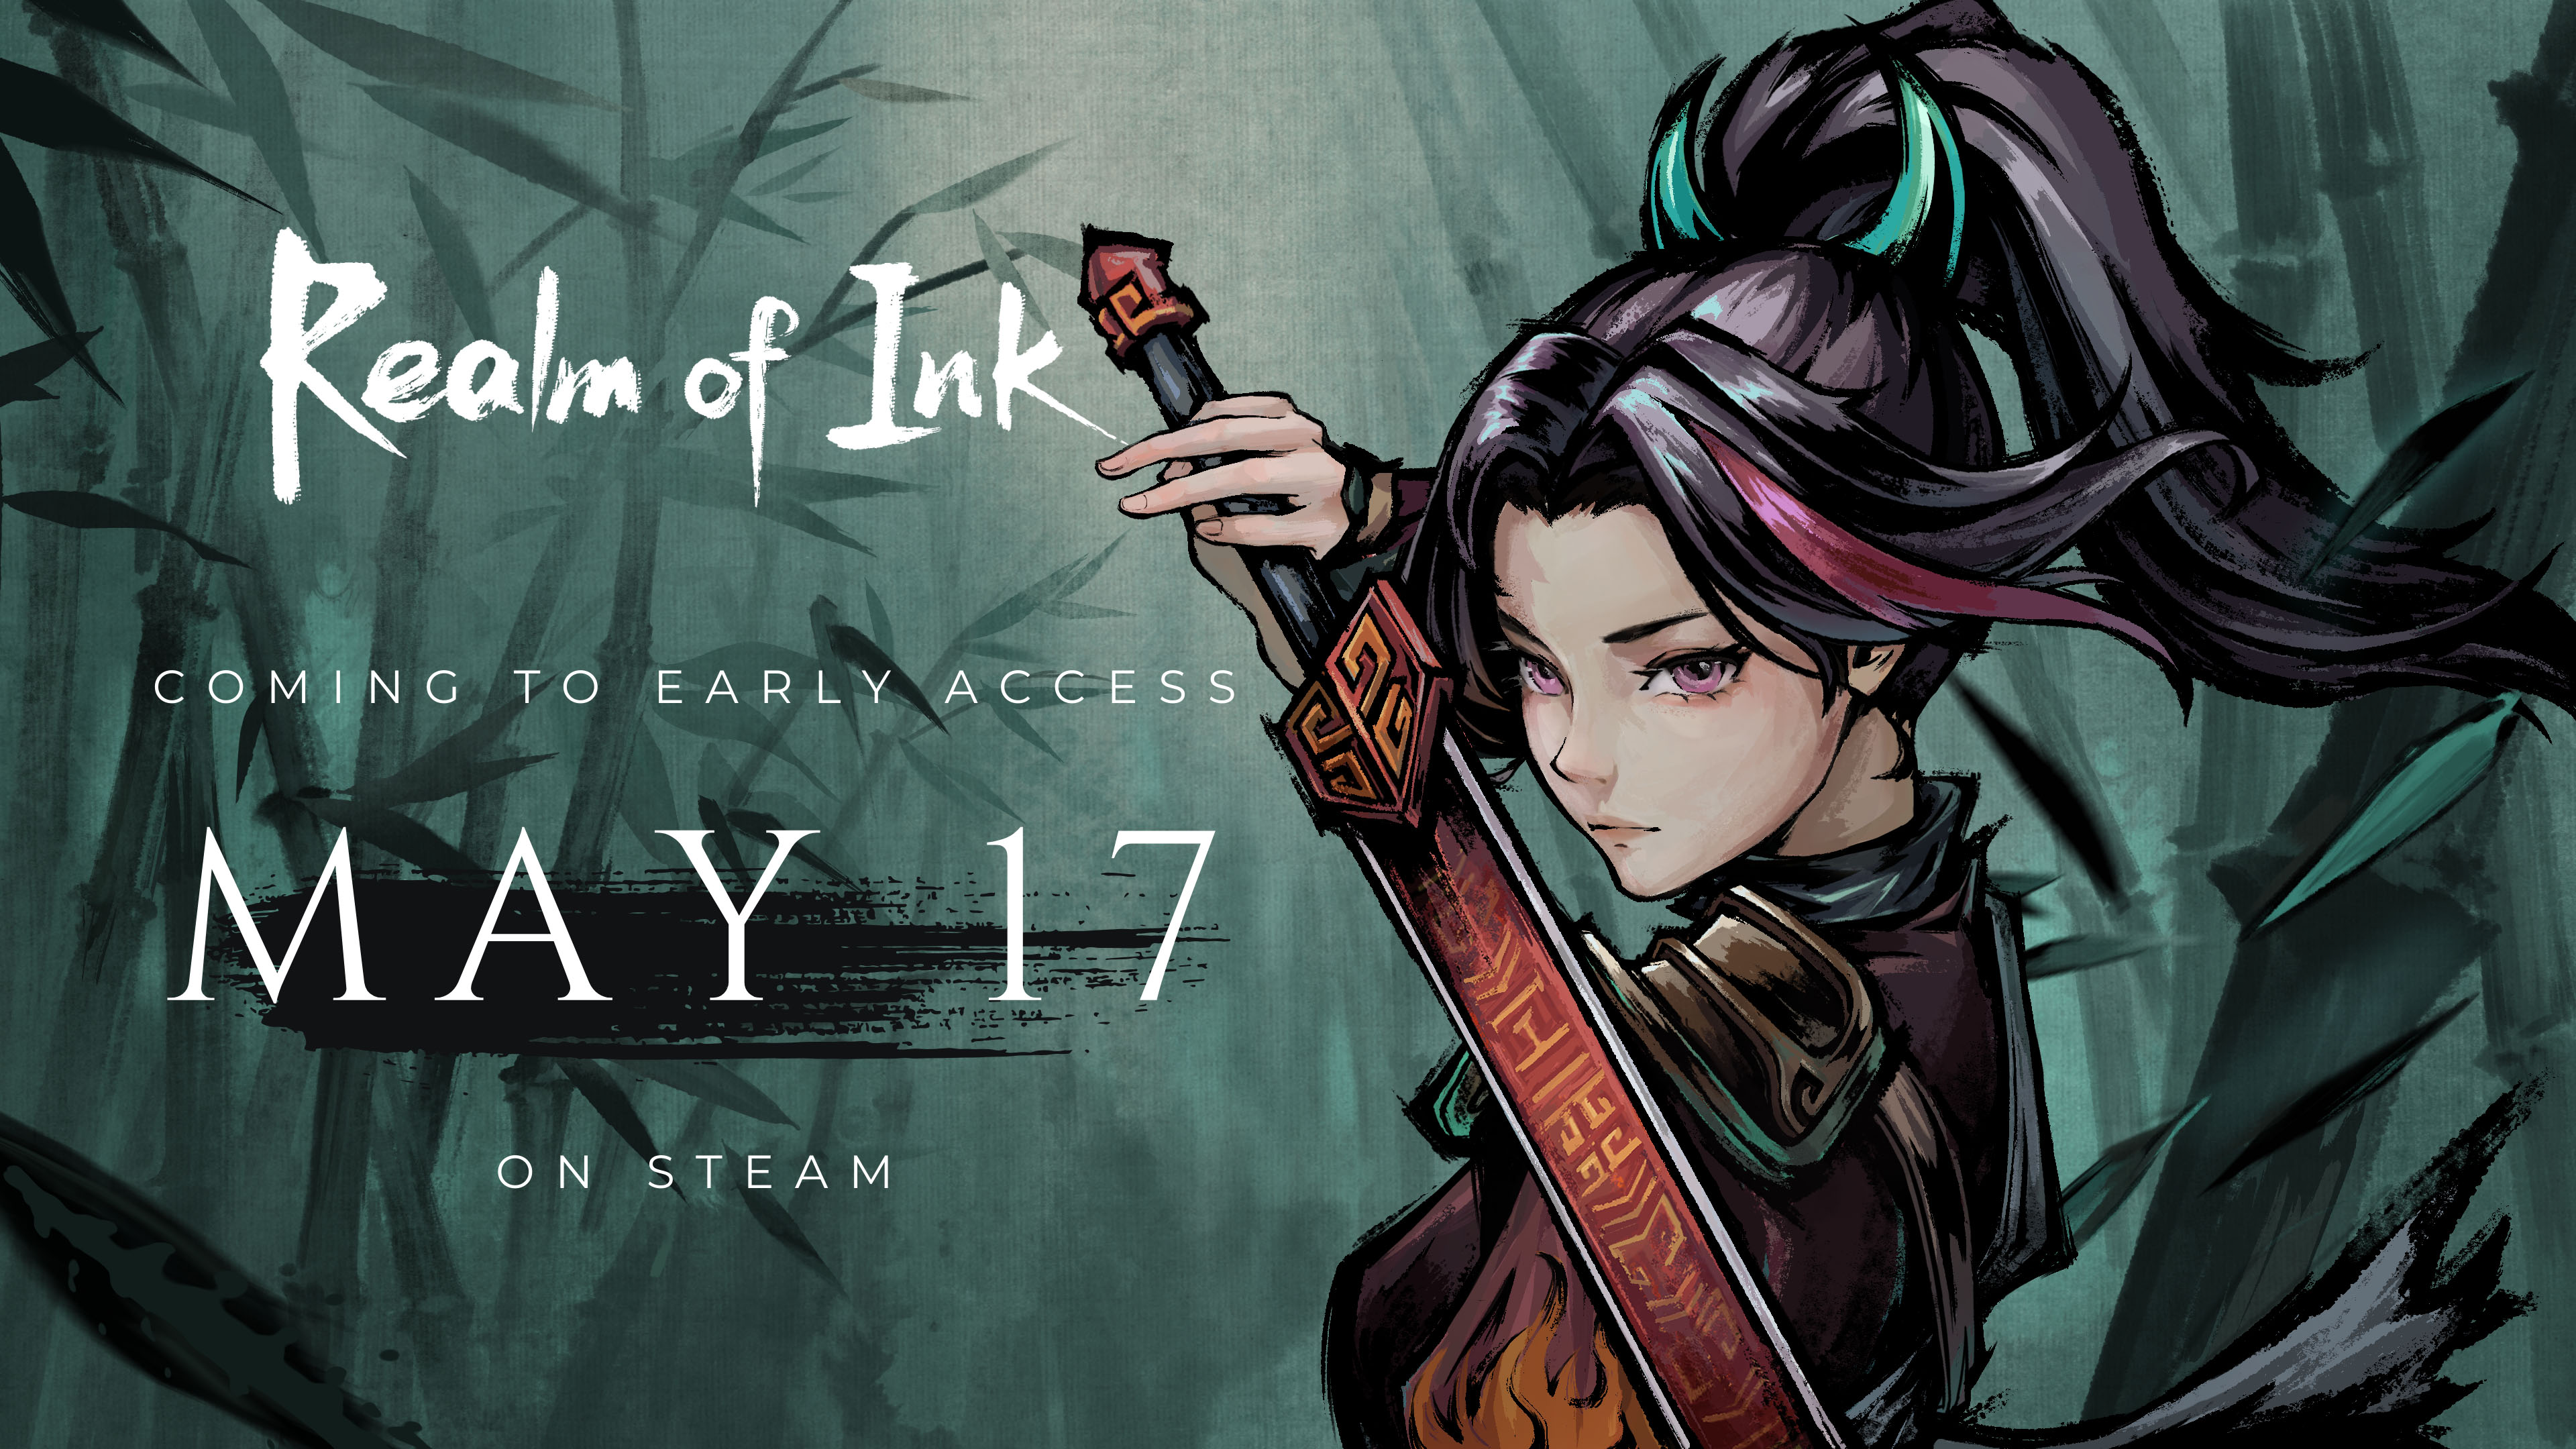 #
      Realm of Ink launches in Early Access for PC on May 17